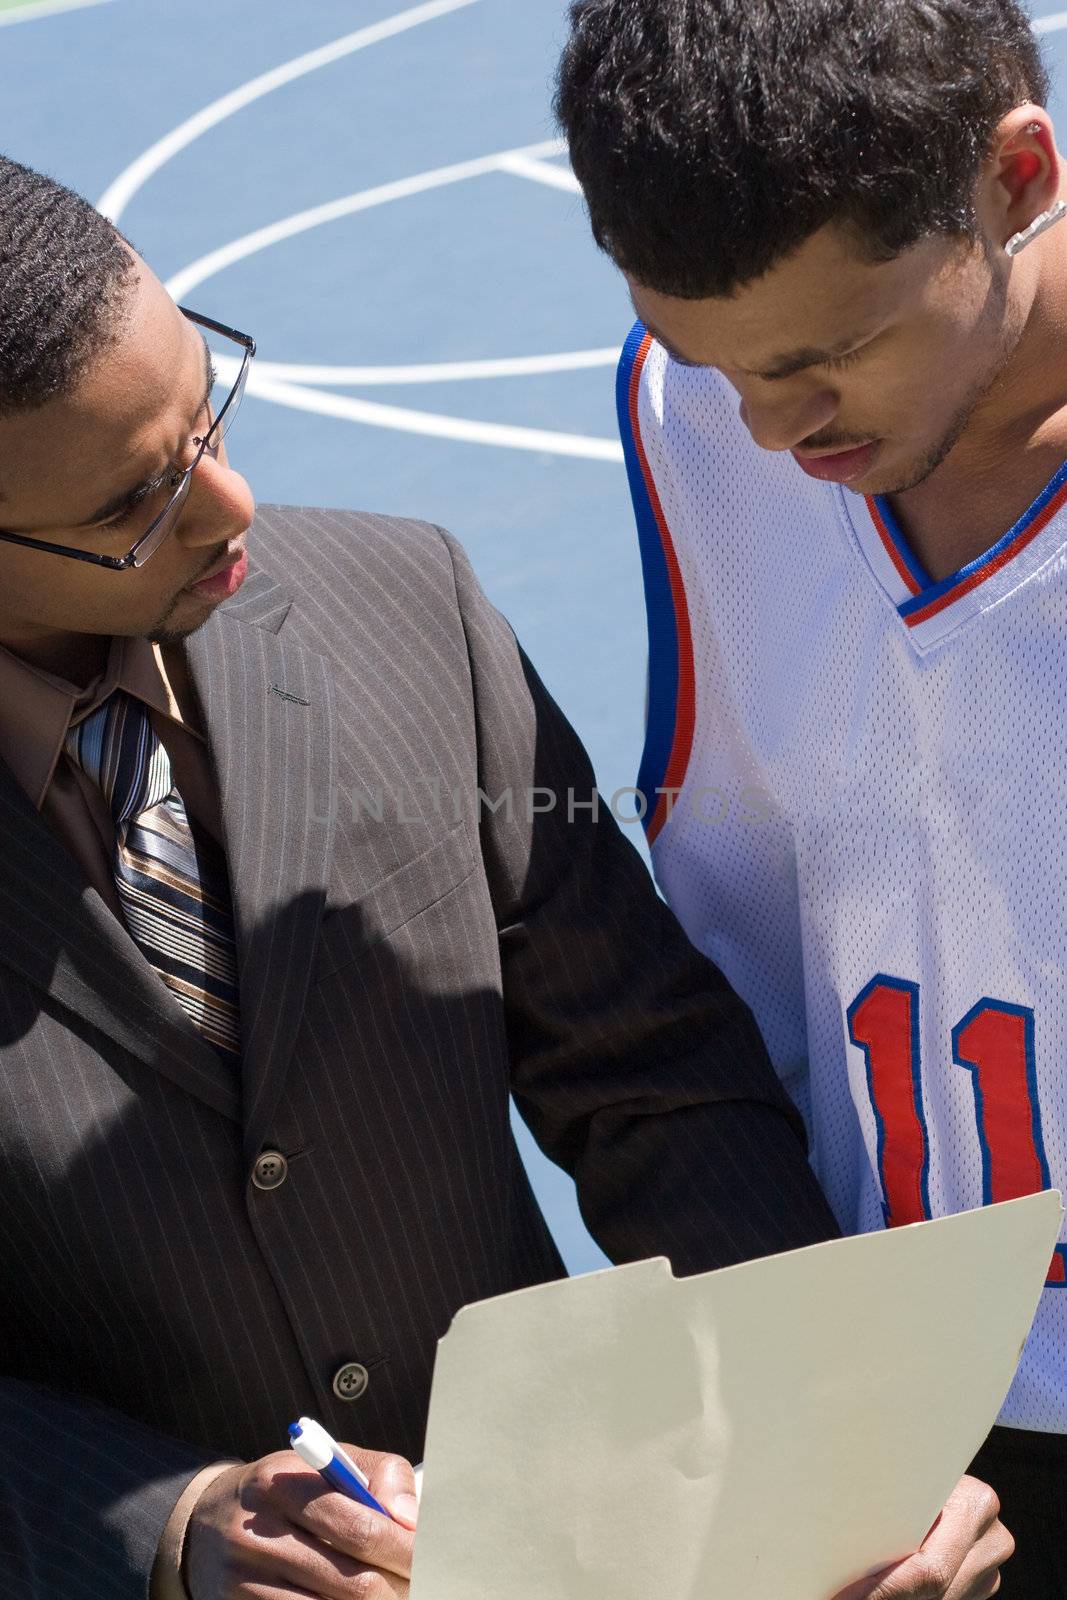 A basketball coach in a business suit sharing a play with a player on the team.   He could be also be recruiter trying to get him to sign a contract.